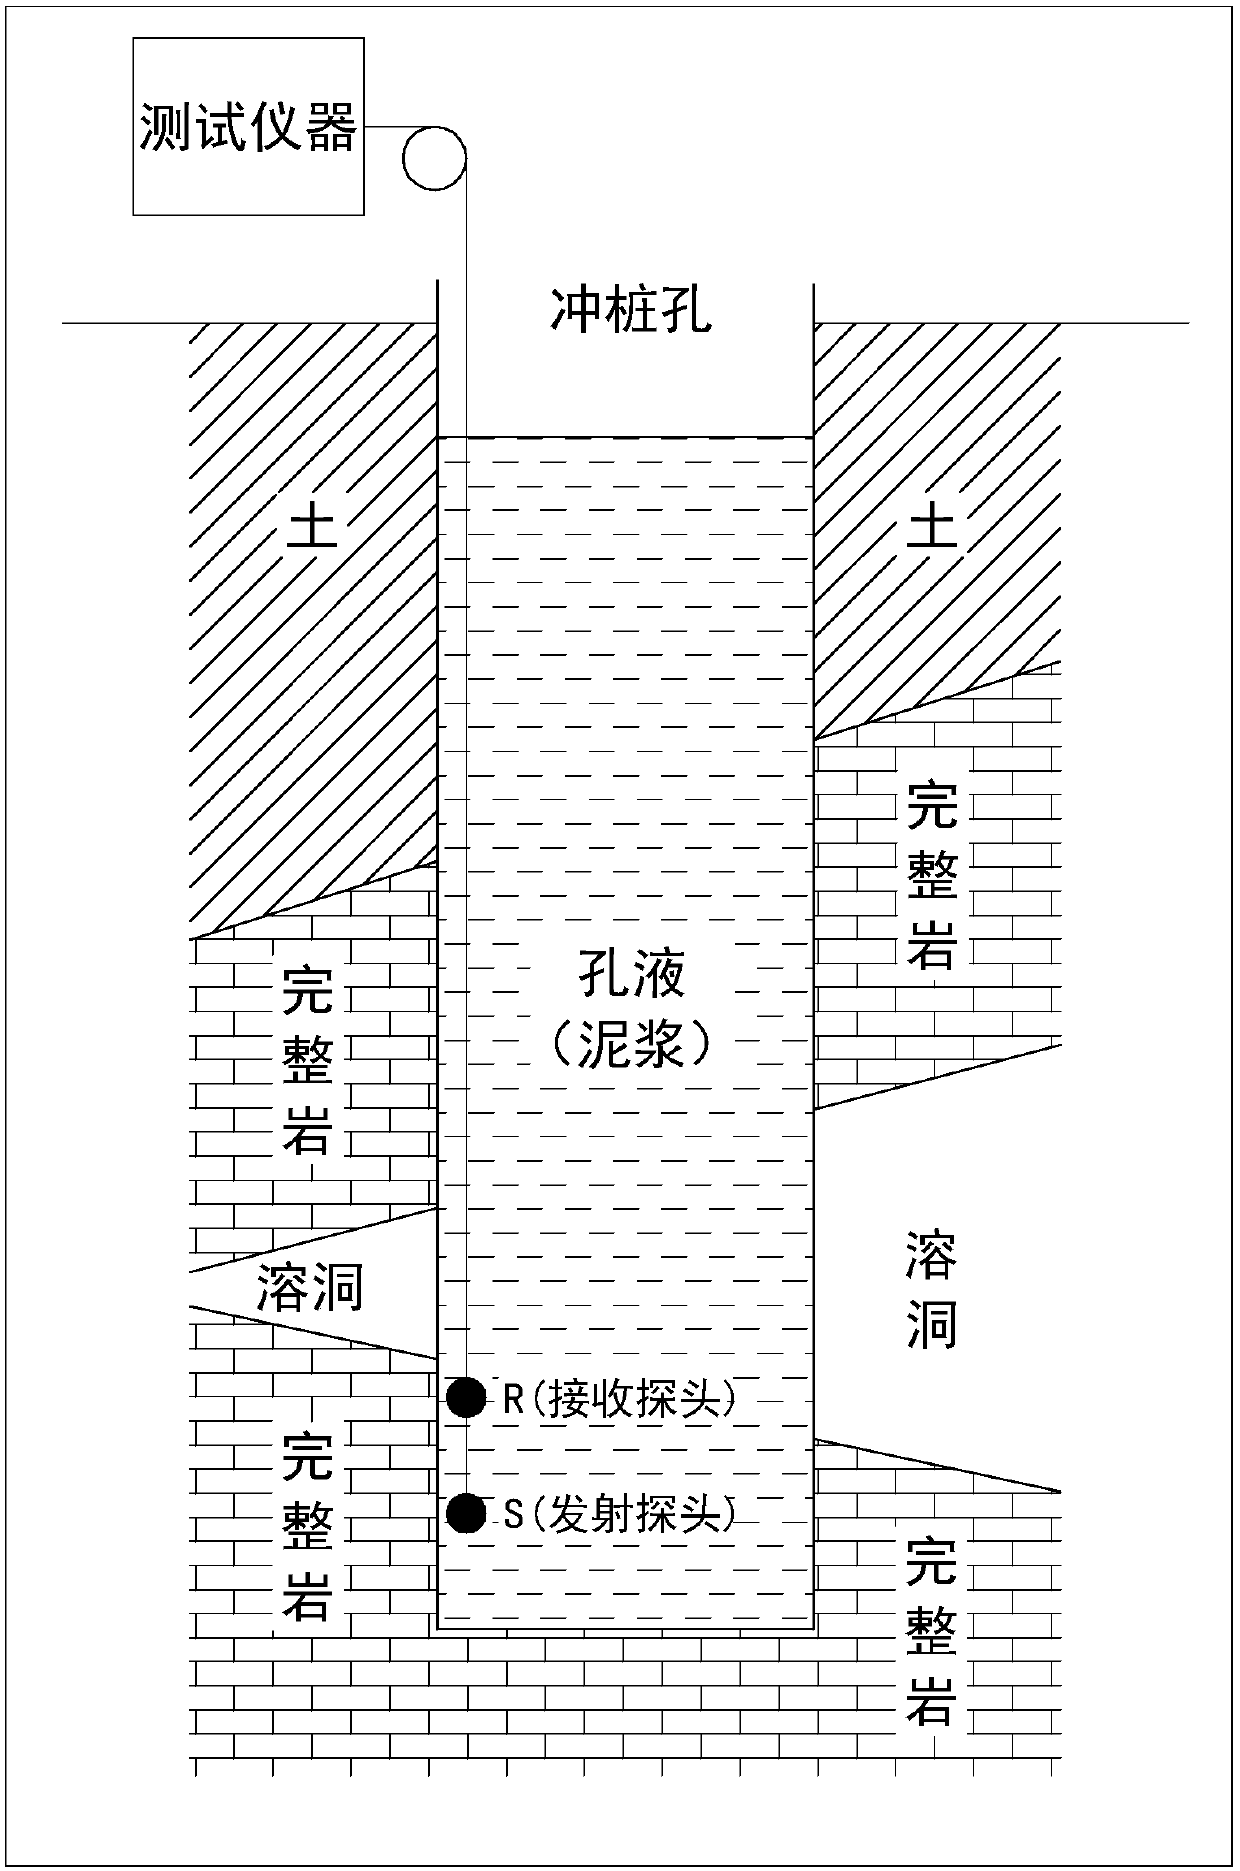 Integrity detection method of large-diameter cast-in-situ pile hole wall during construction of cast-in-place pile foundation